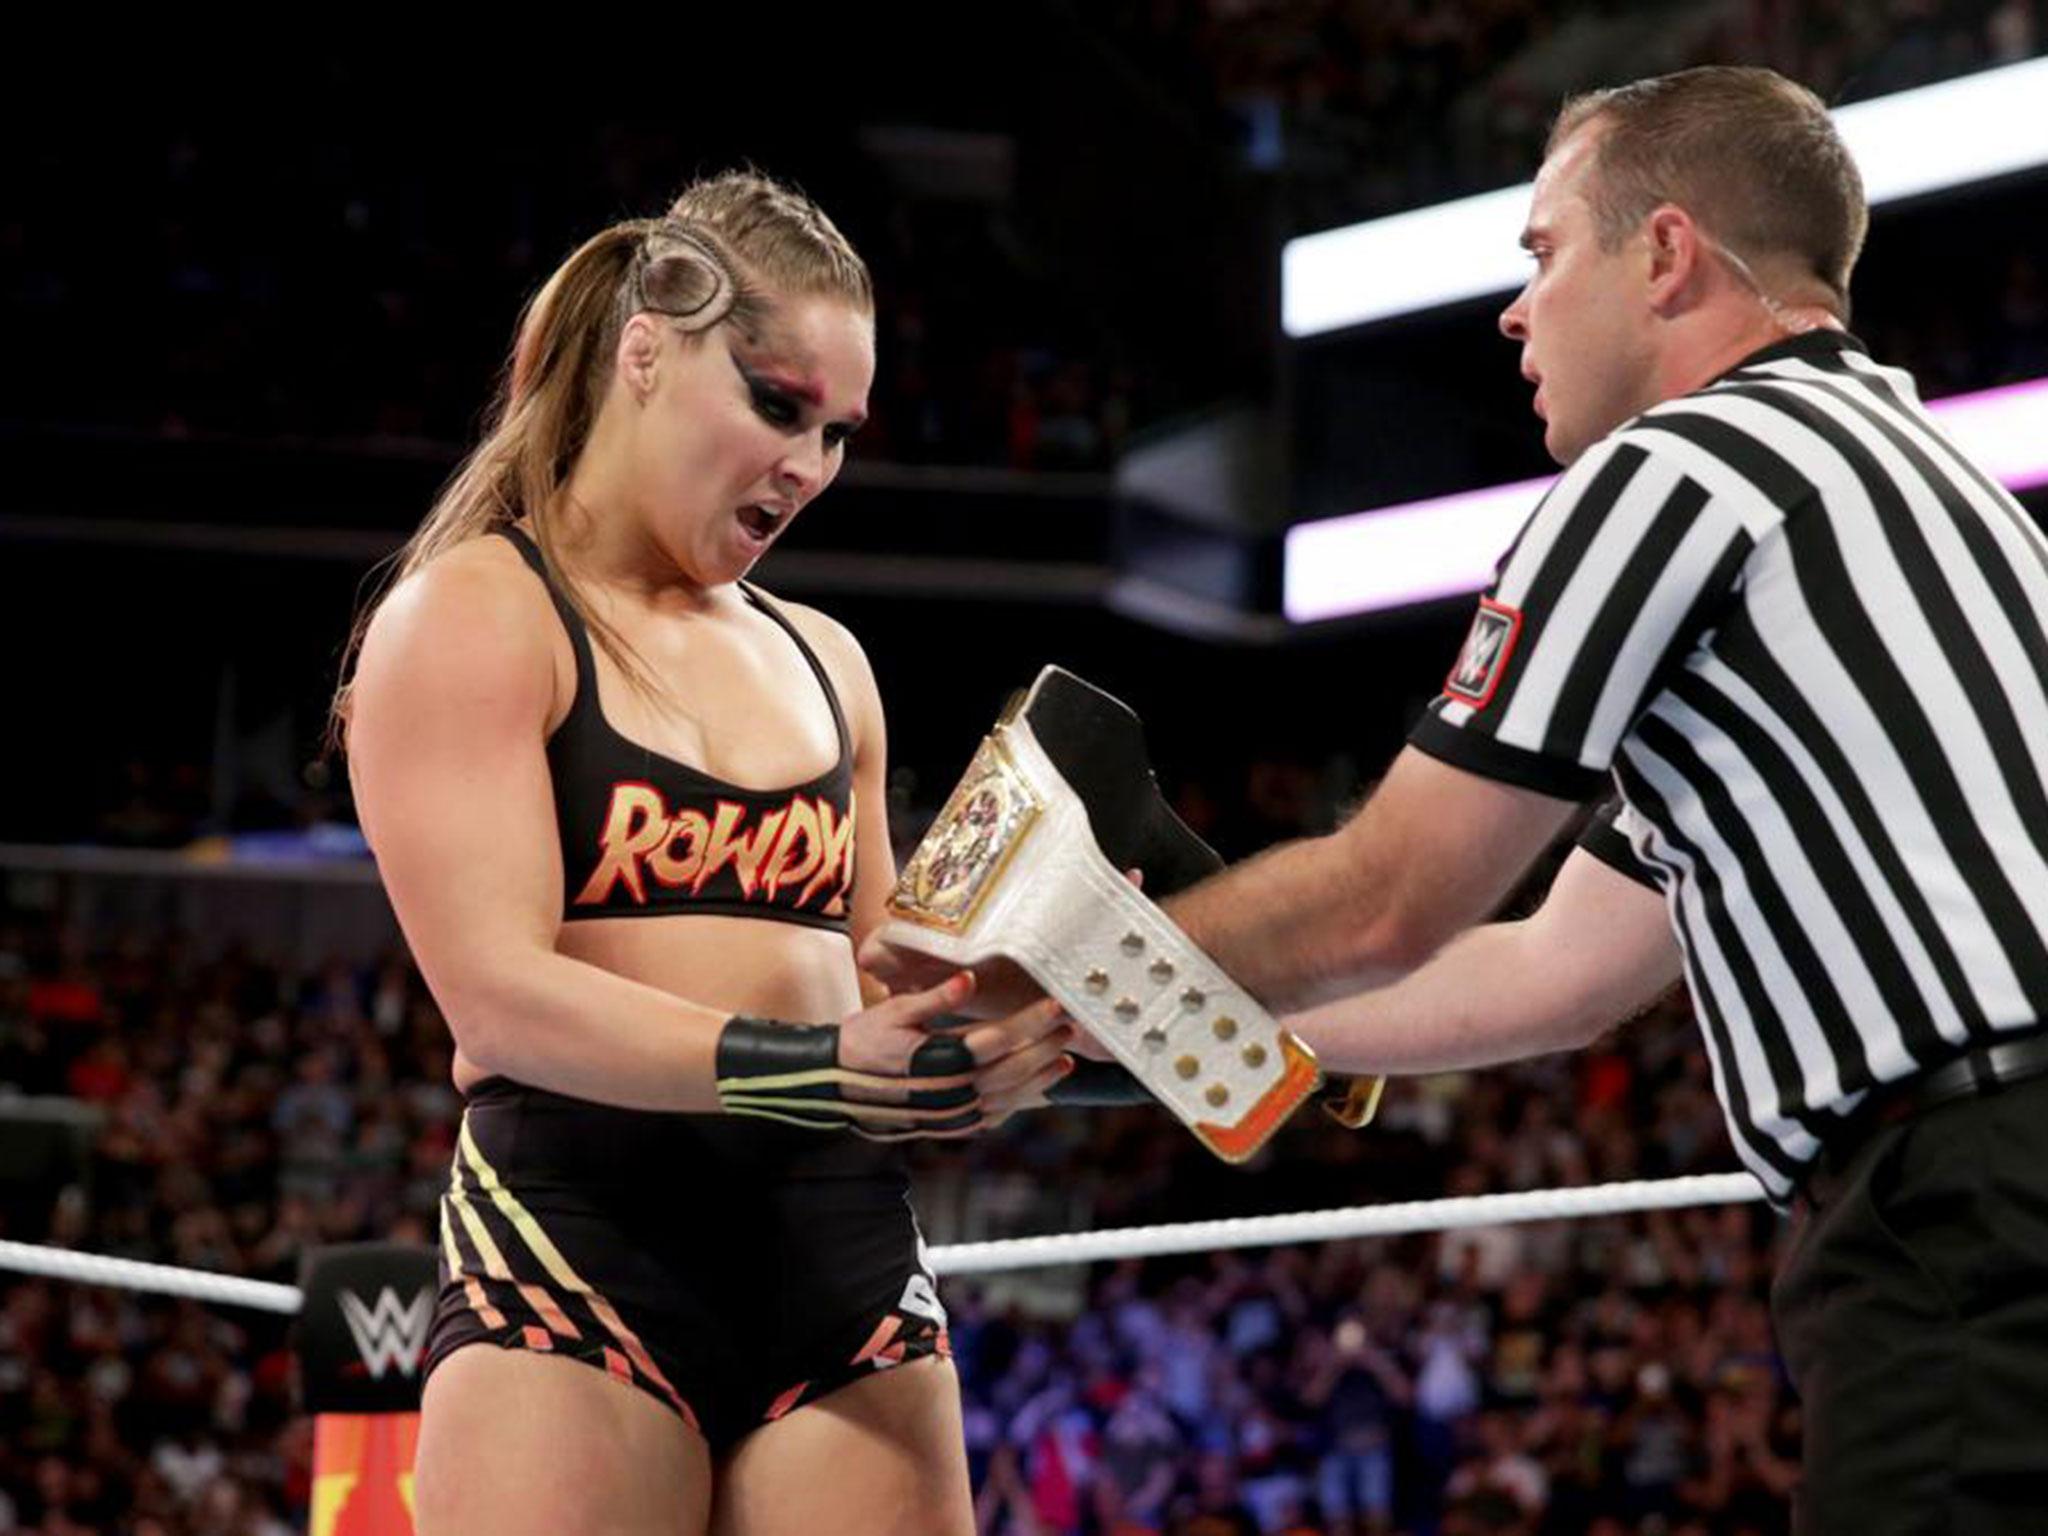 Ronda Rousey finally won her first WWE title